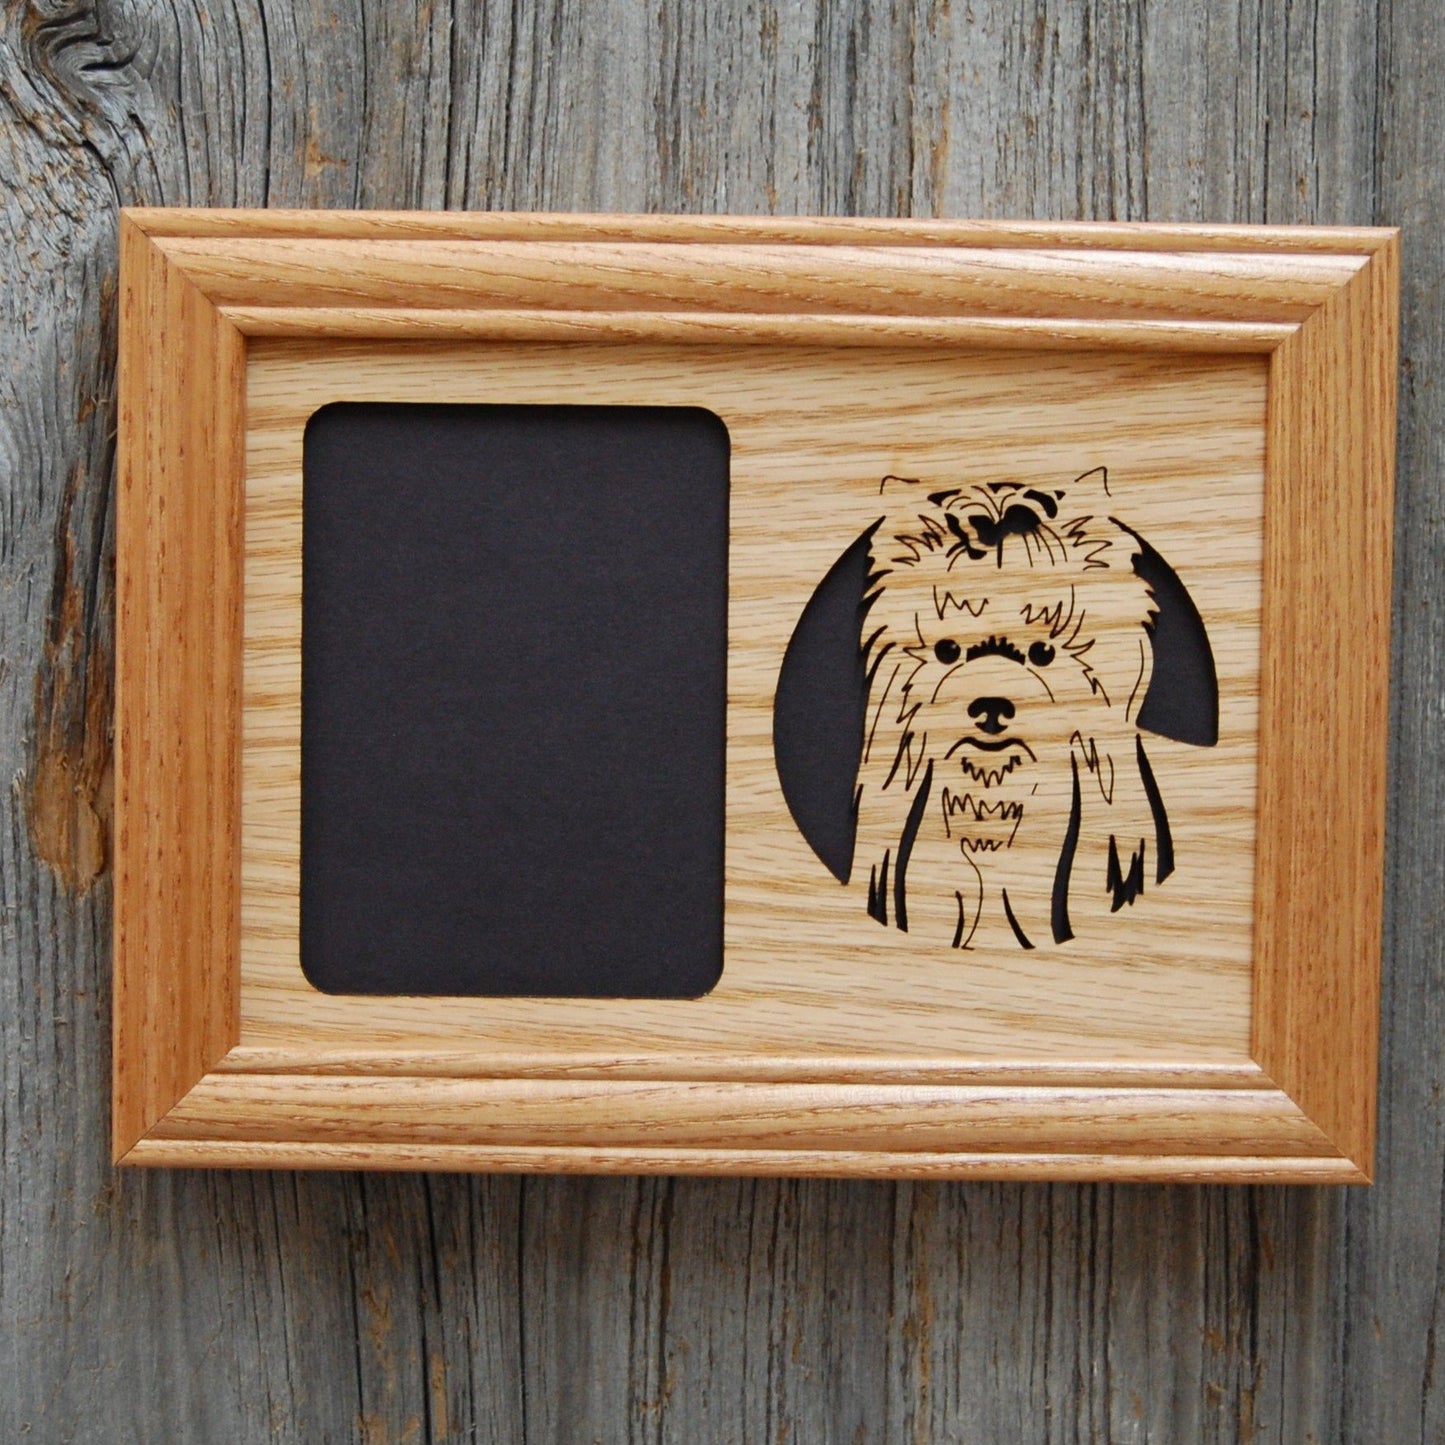 Dog Portrait Picture Frame - 5x7 Frame Holds a 3x4 Photo